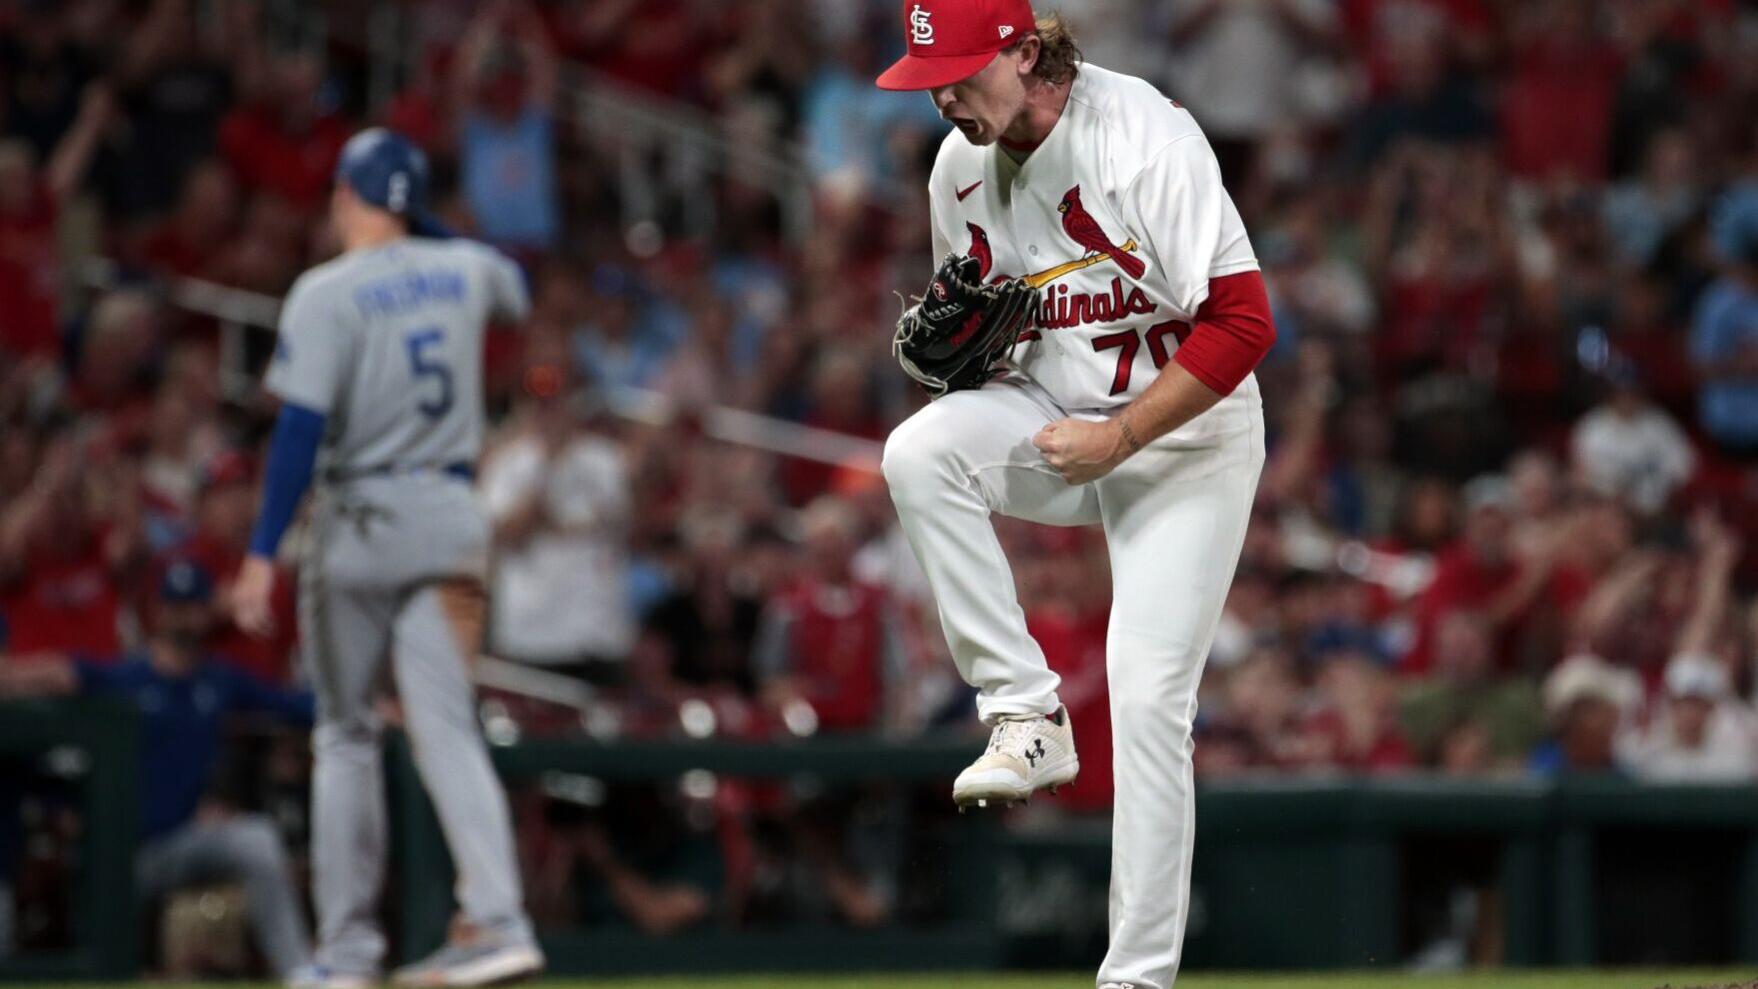 Quick hits: Cardinals avoid surprise ending with dramatic win, 7-6, over Dodgers